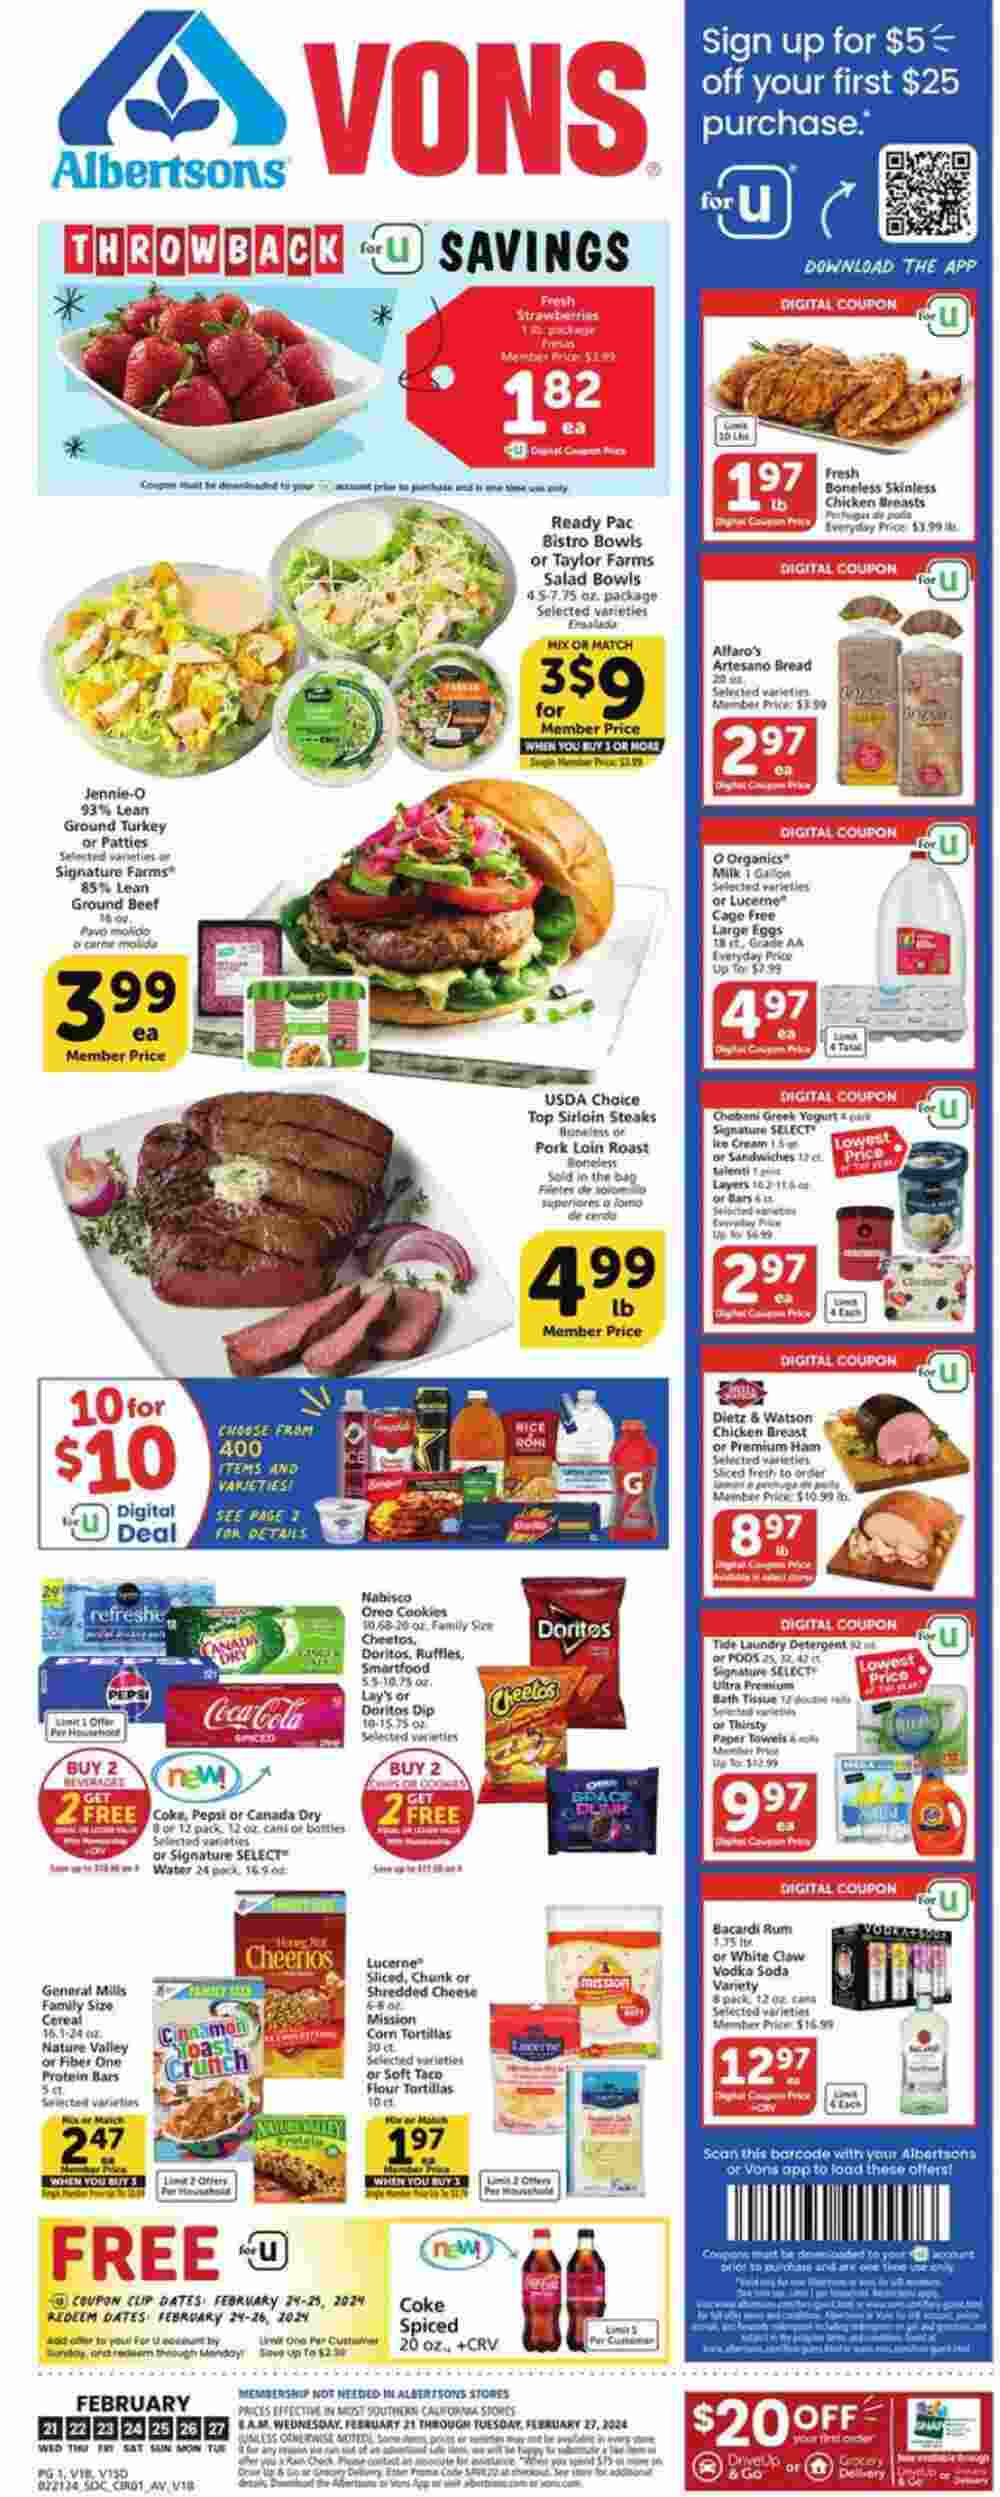 Vons Weekly Ad February 21 to February 27, 2024 1 – vons ad 1 3